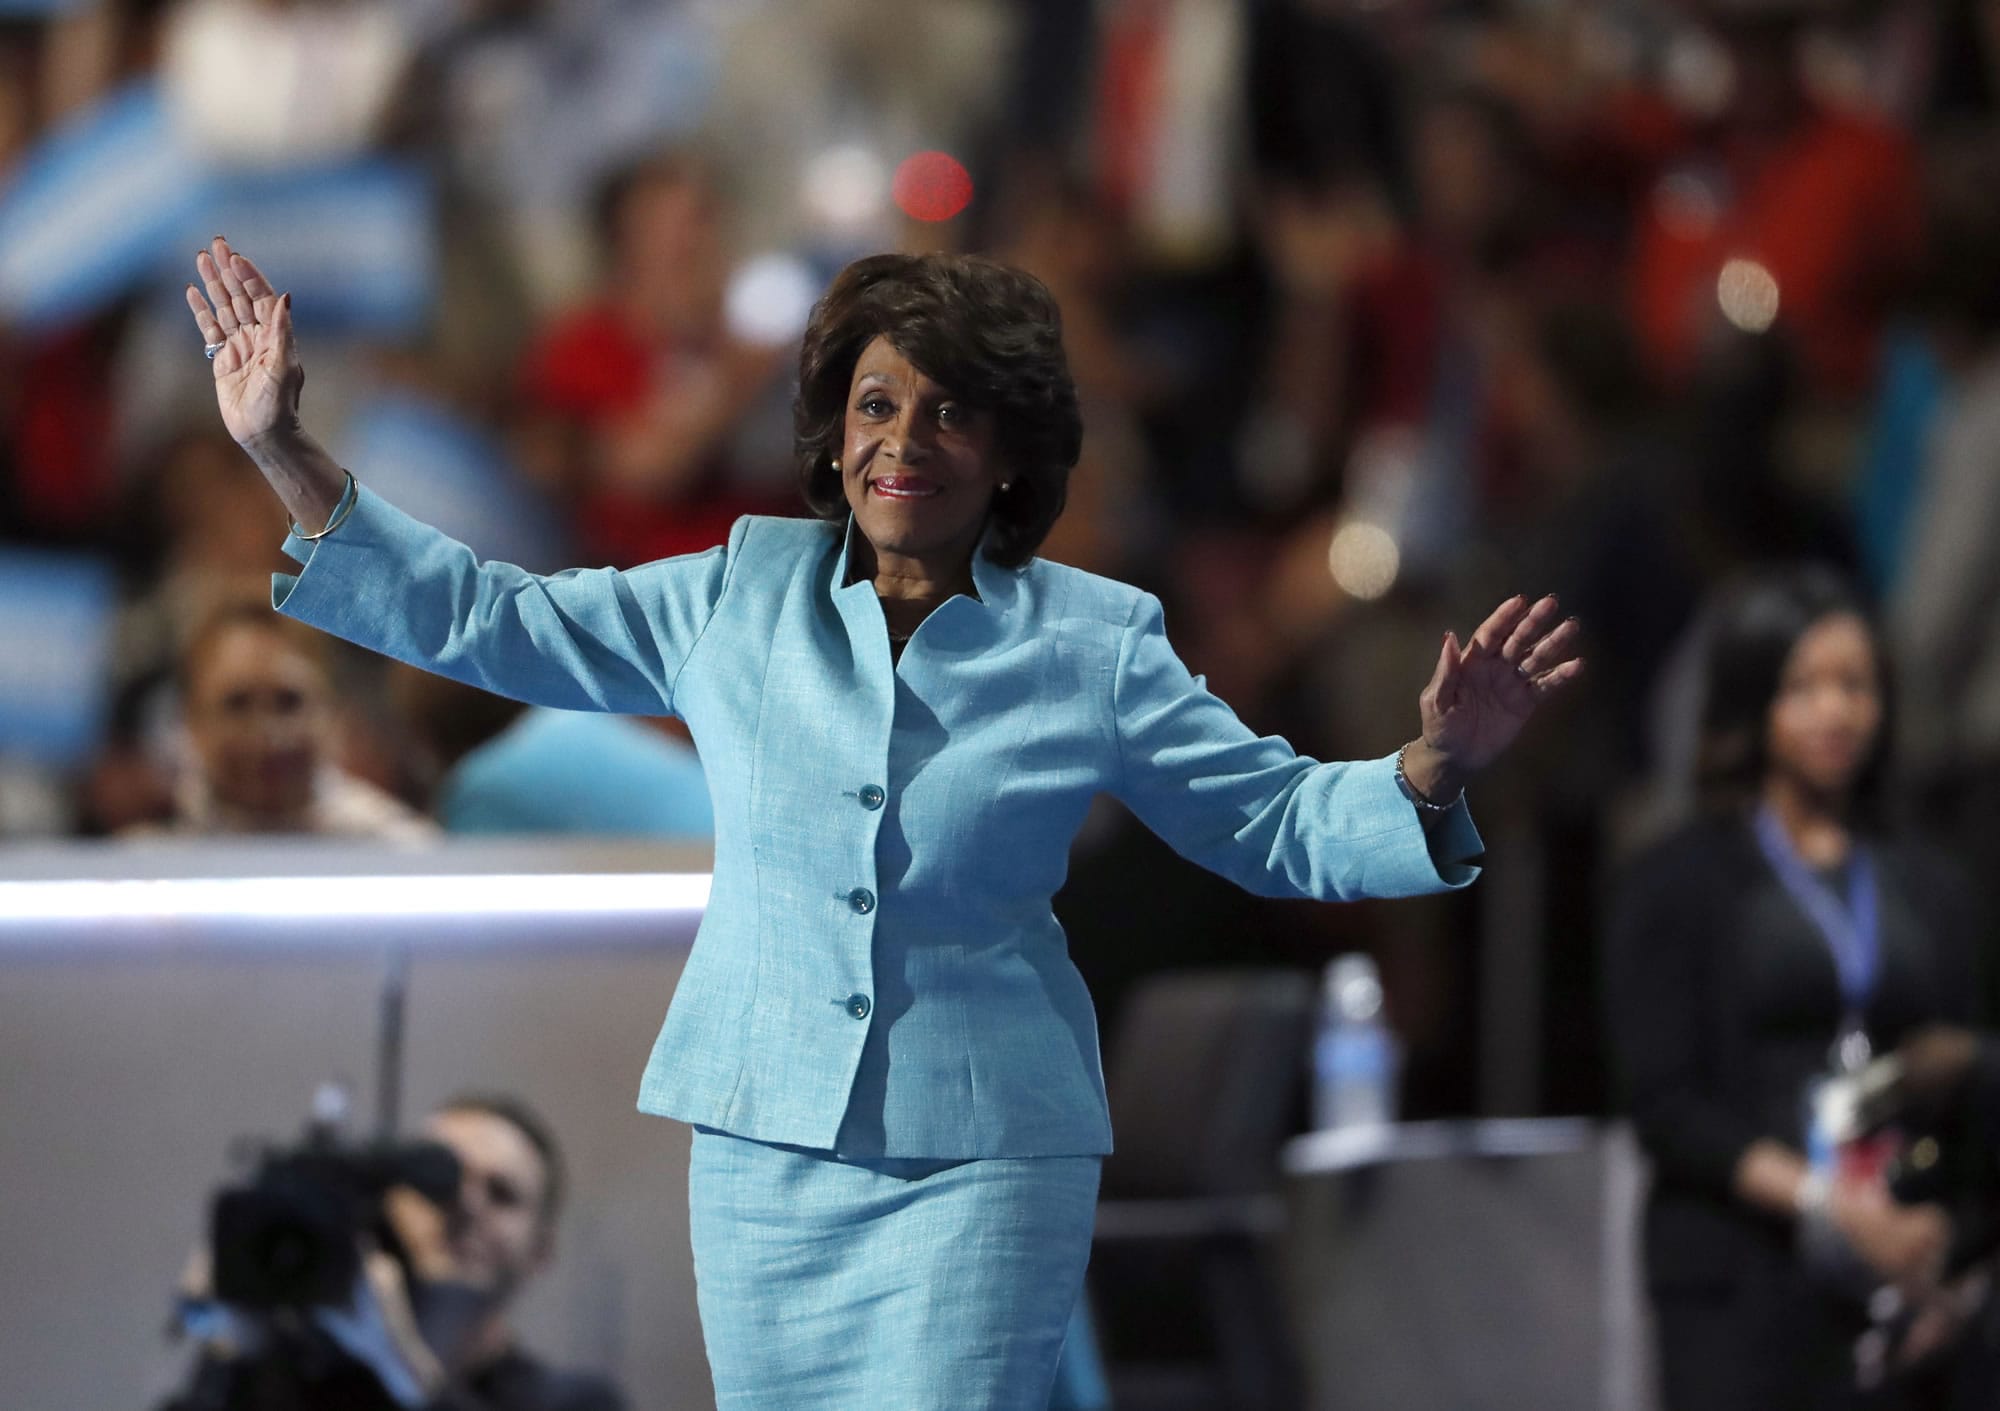 FILE - In this July 27, 2016, file photo, U.S. Rep. Maxine Waters, D-Calif., takes the stage to speak during the third day of the Democratic National Convention in Philadelphia. Activist Brittany Packnett encouraged people to tweet under #BlackWomenAtWork Tuesday, March 28, 2017. It’s a response to O’Reilly’s comment Tuesday that Democratic U.S. Rep. Maxine Waters’ hair was a "James Brown wig." He later apologized.